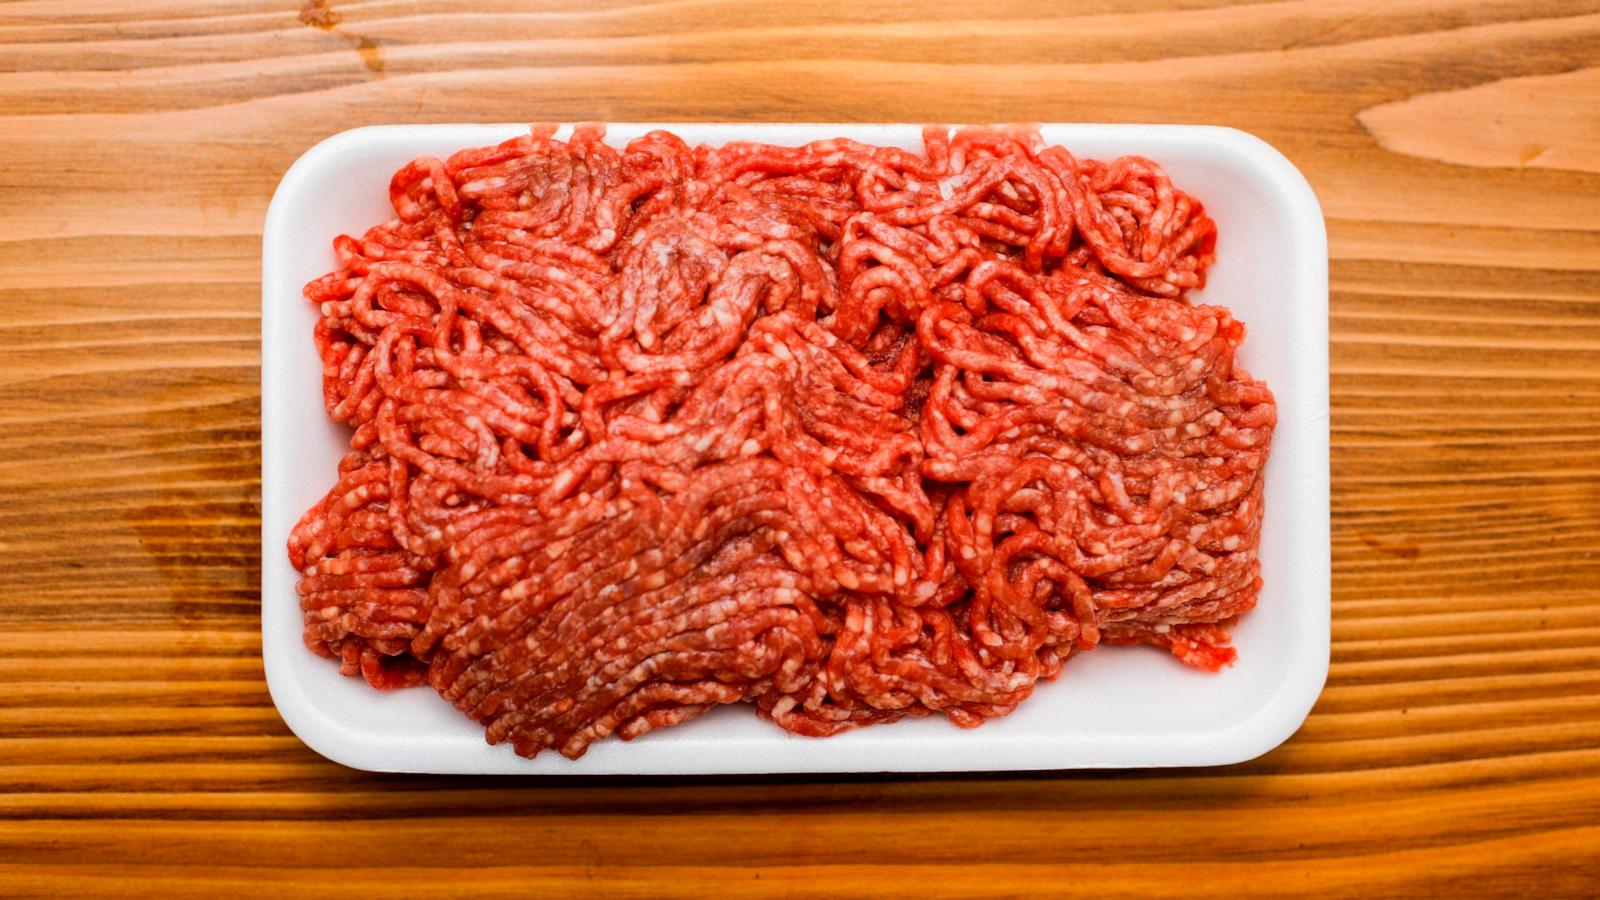 More than 6,700 pounds of raw ground beef recalled due to E. coli